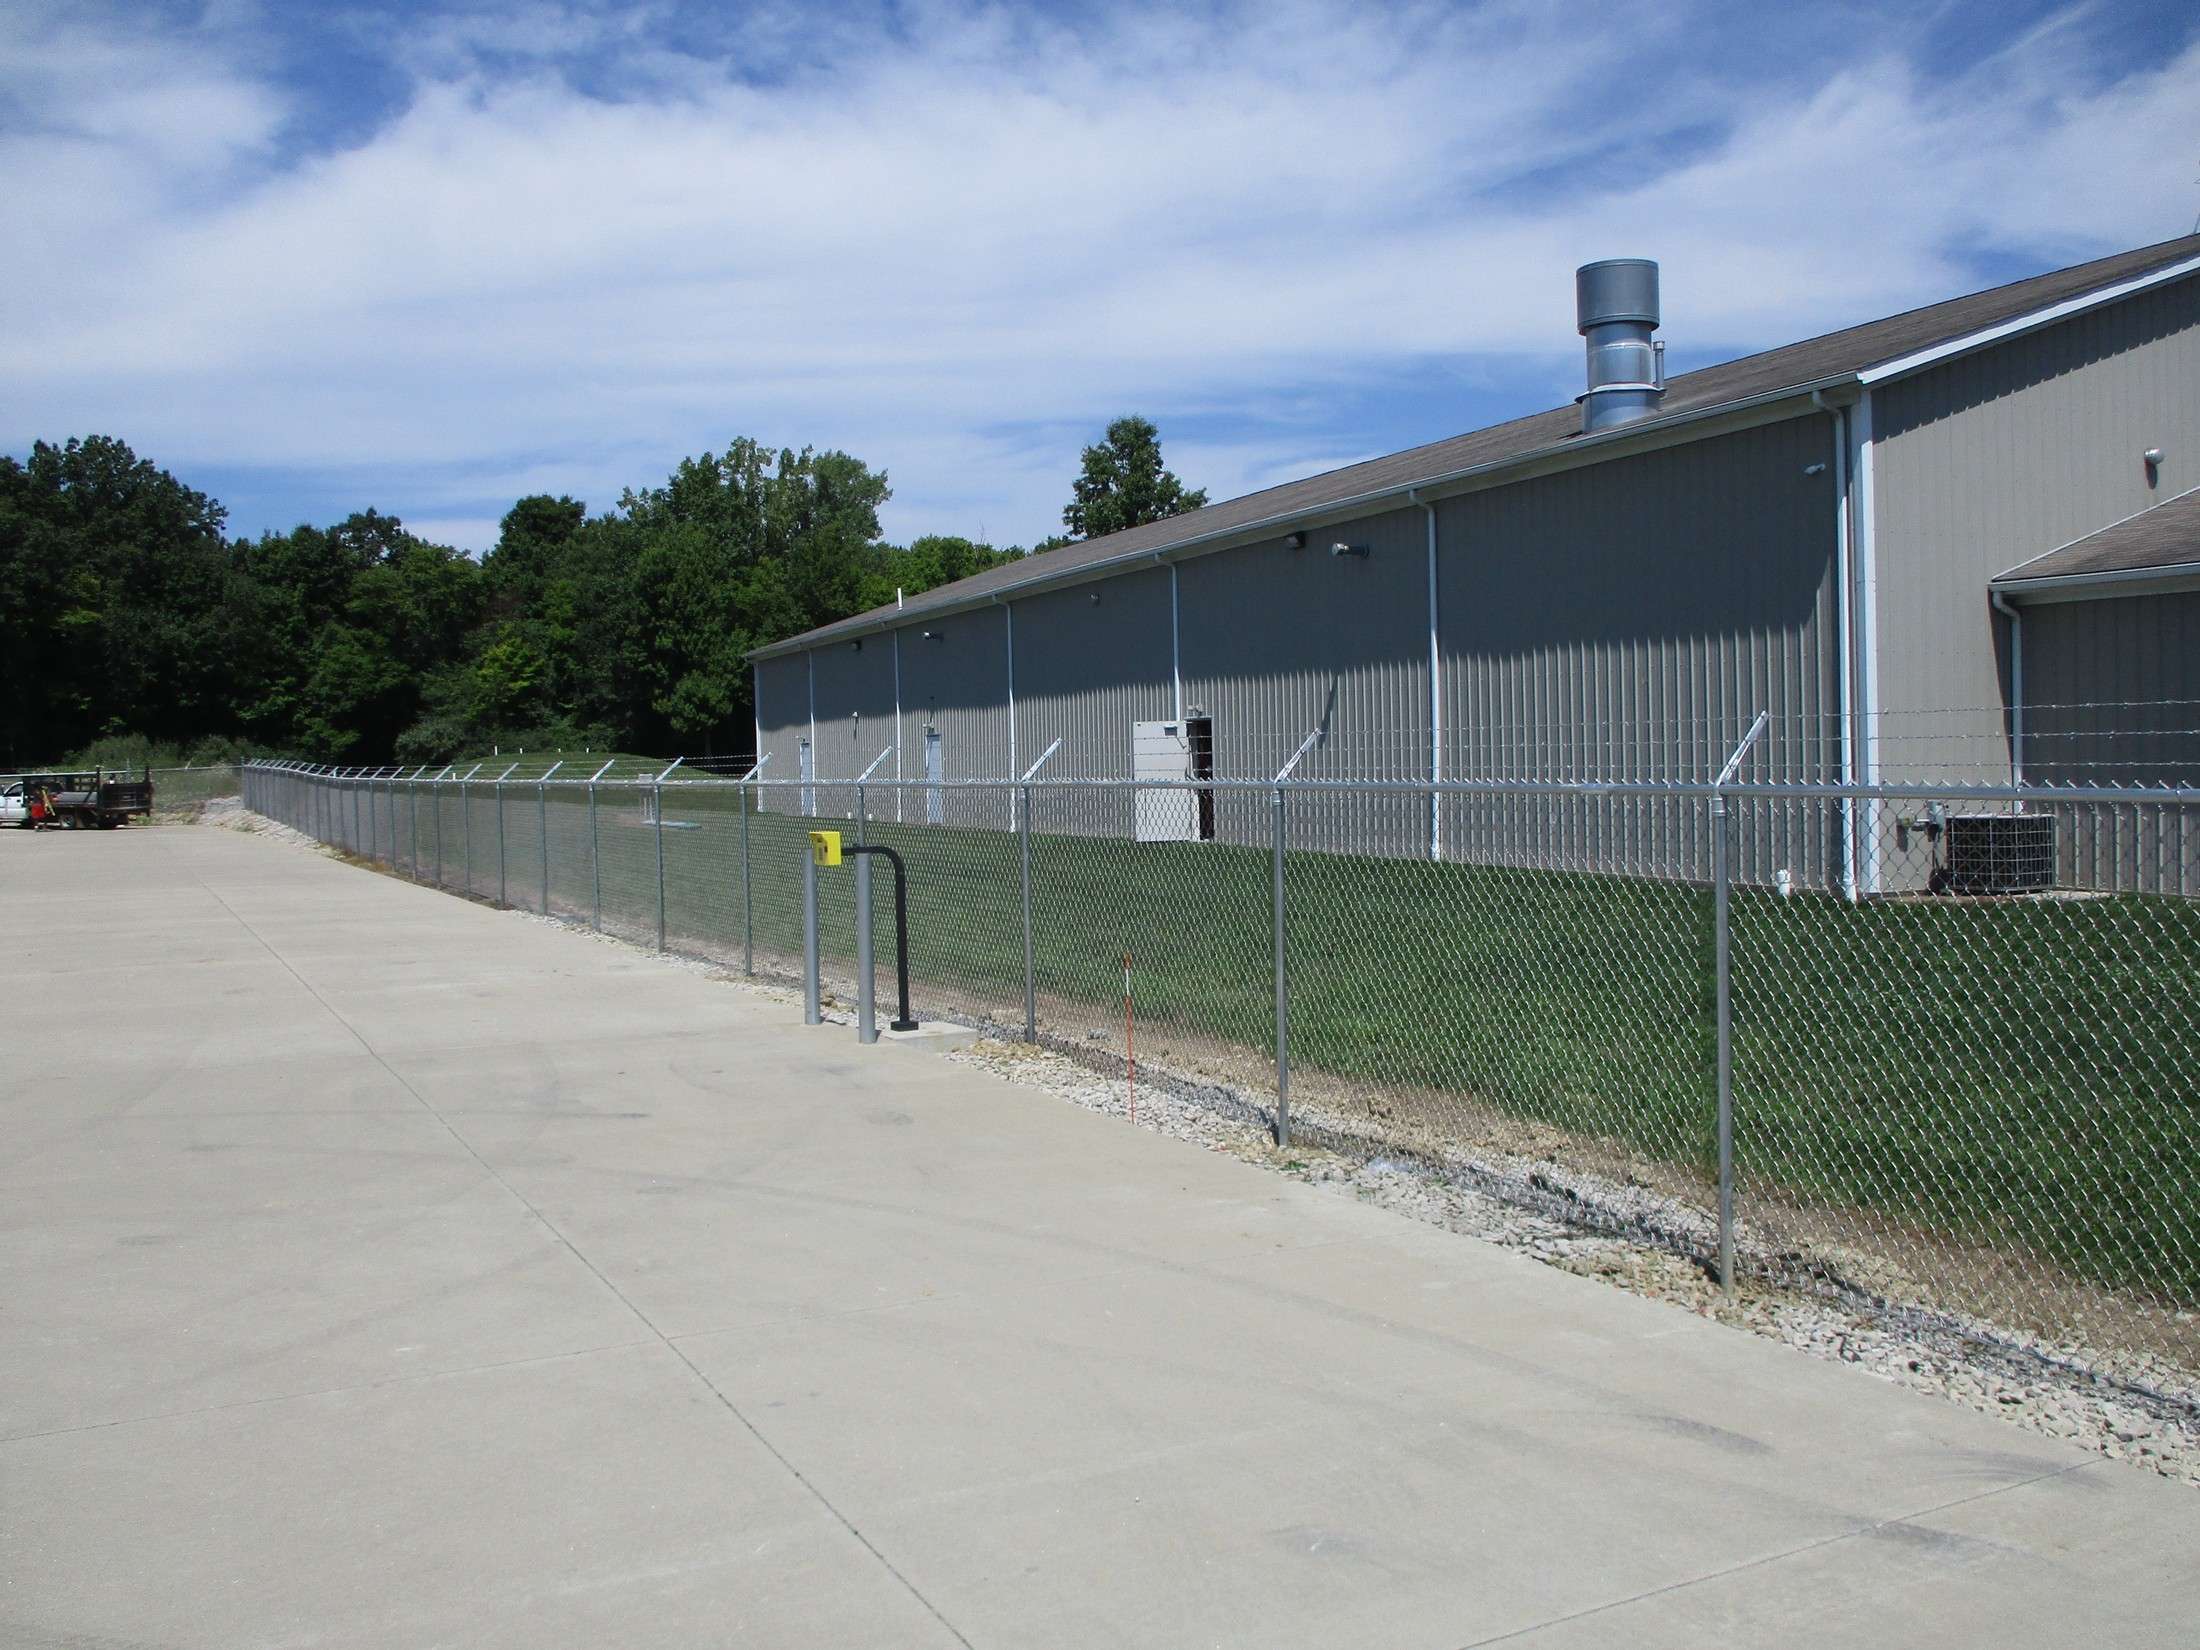 Fence on the east side